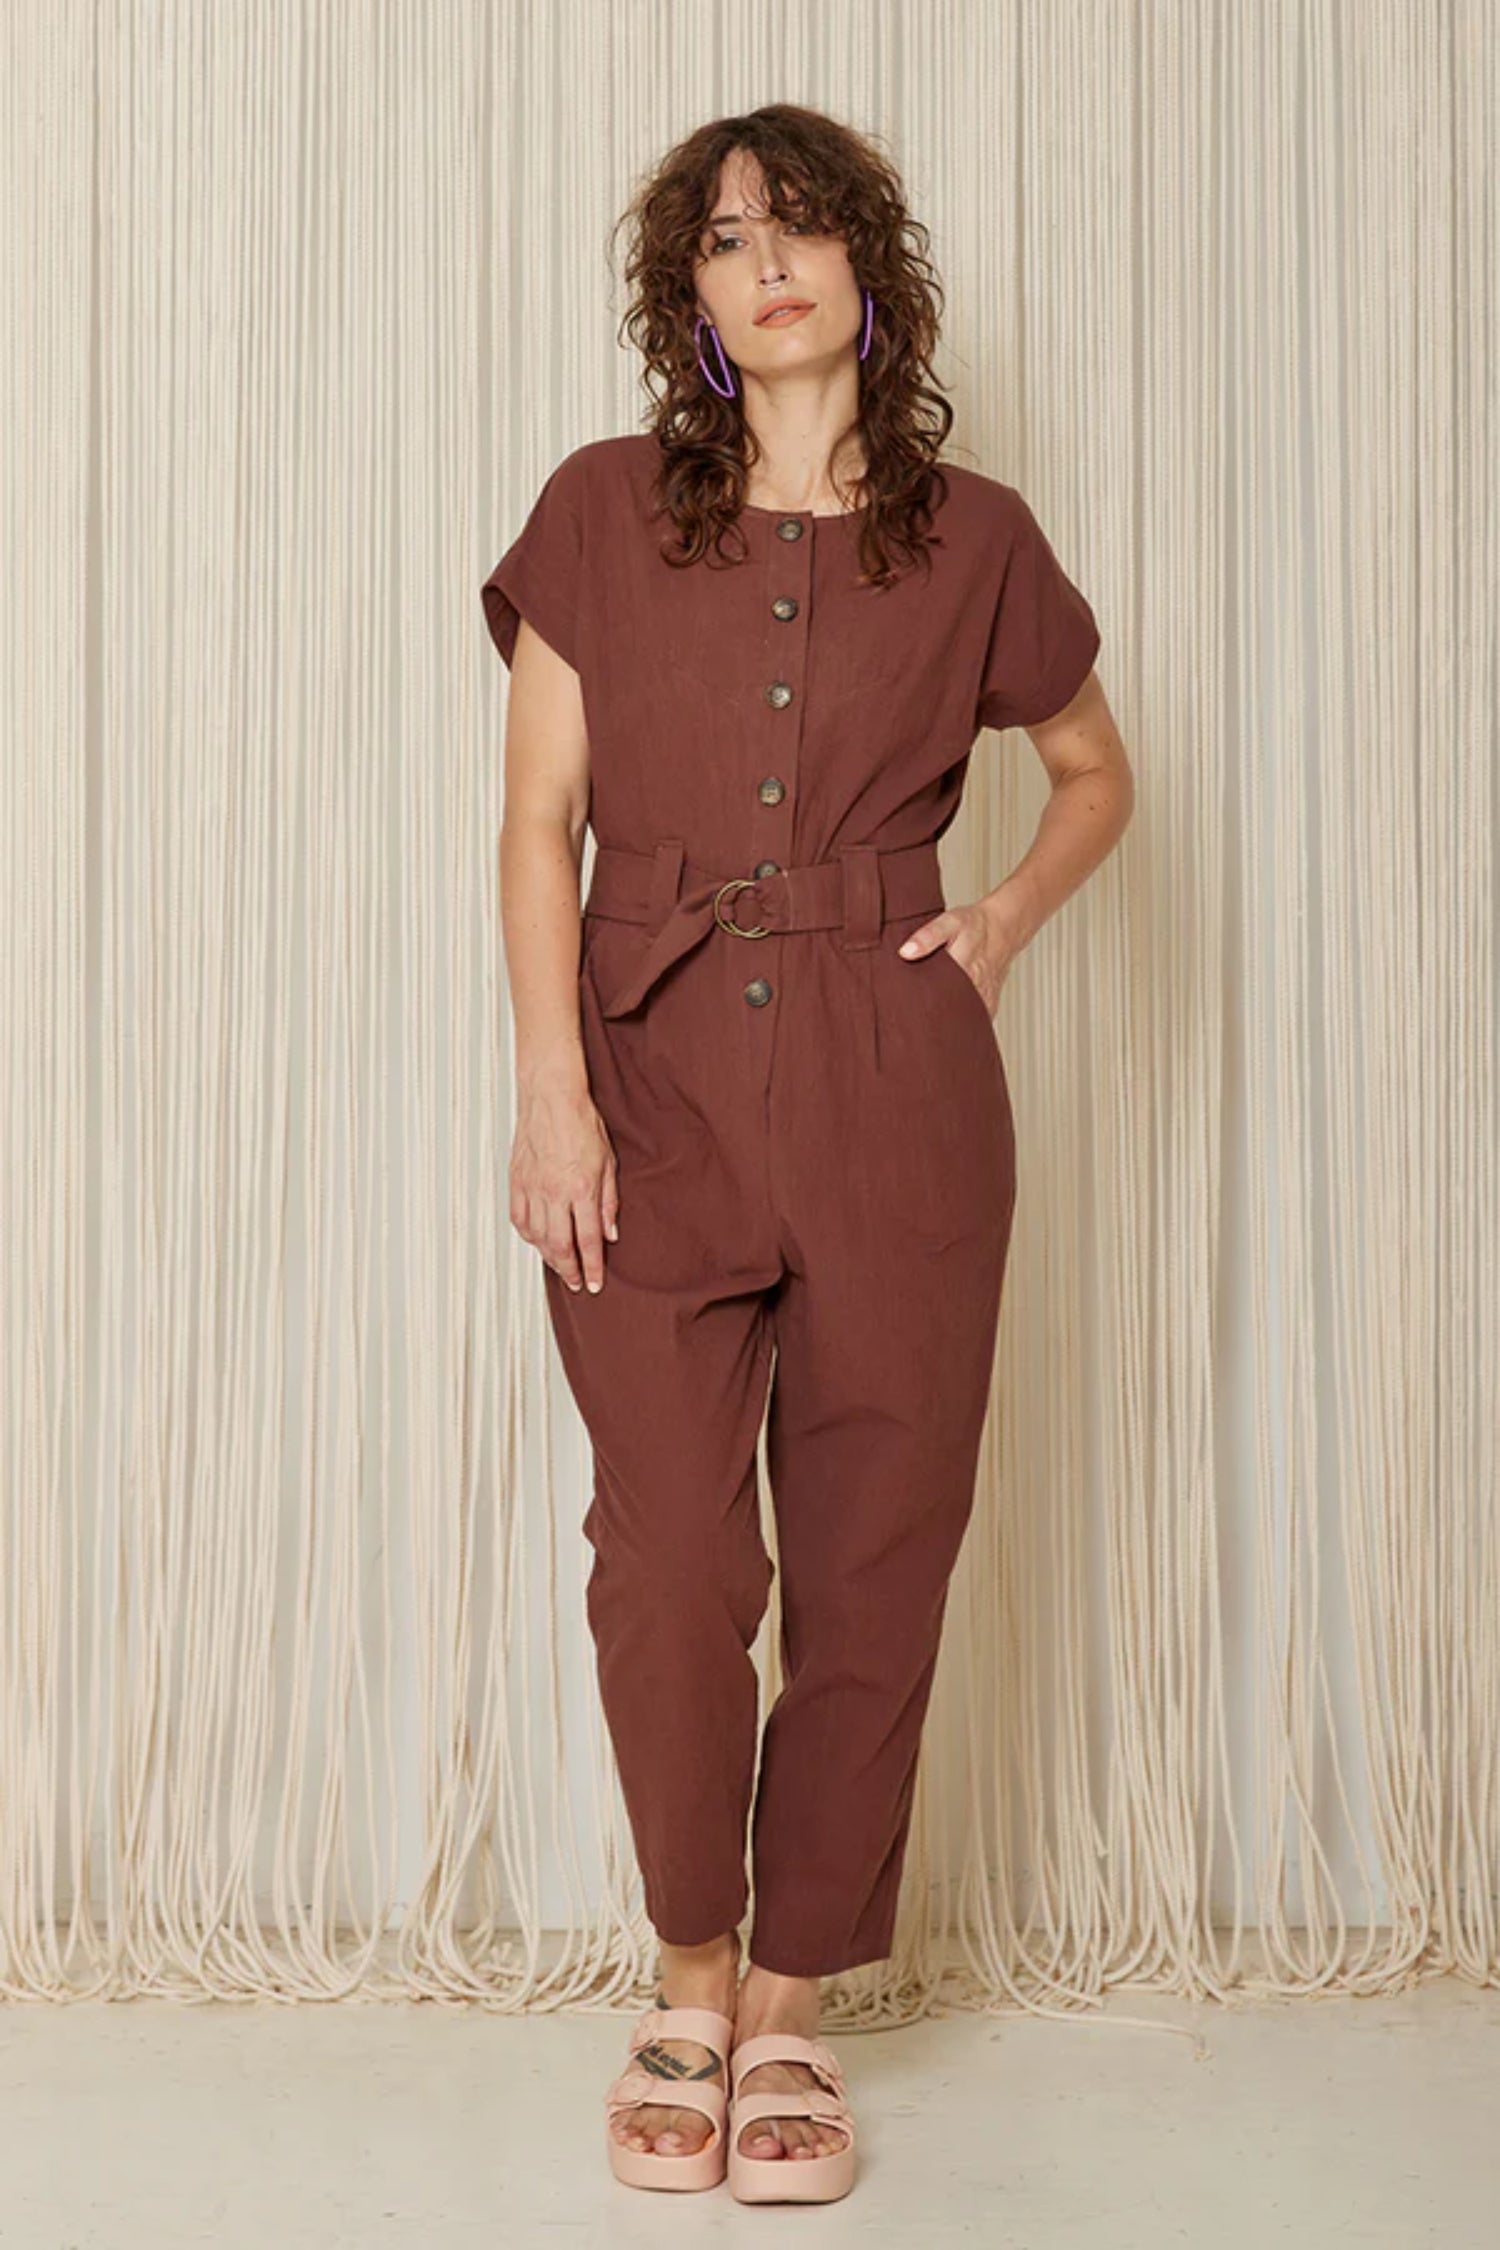 Arnica Jumpsuit by Cokluch, Sumac, short extended sleeves, round neck, front button placket, loop-buckle belt at waist, ankle-length, eco-fabric, cotton, sizes XS to XL, made in Montreal 